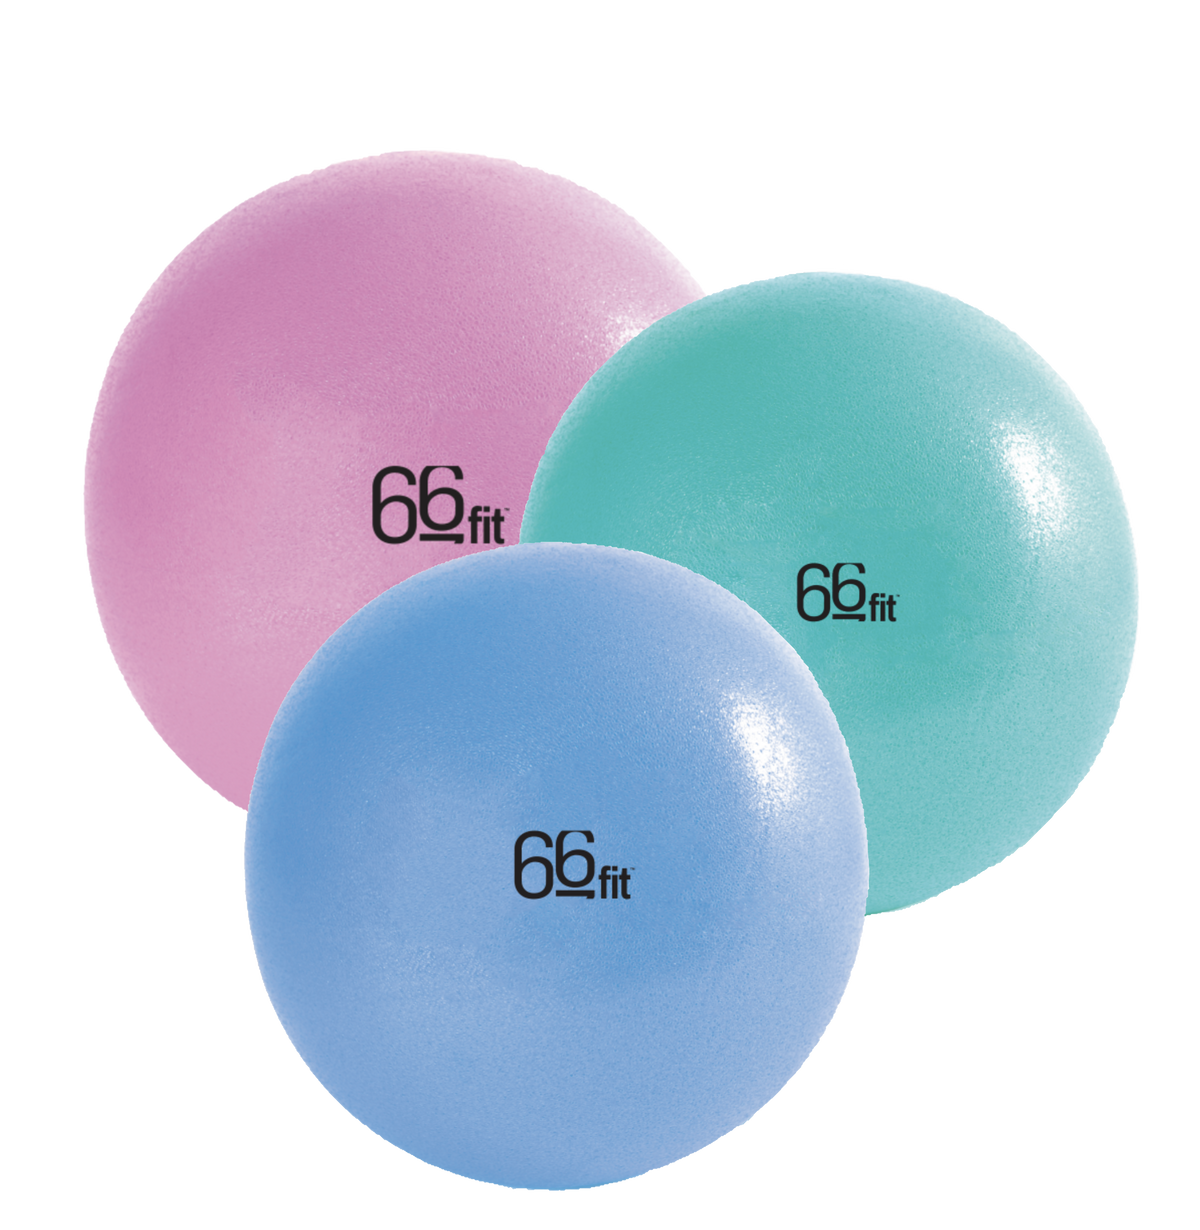 ALLCARE SOFT STABILITY BALL - 3 SIZES AVAILABLE, LIGHT WEIGHT, SOFT AND ANTI SLIP SURFACE